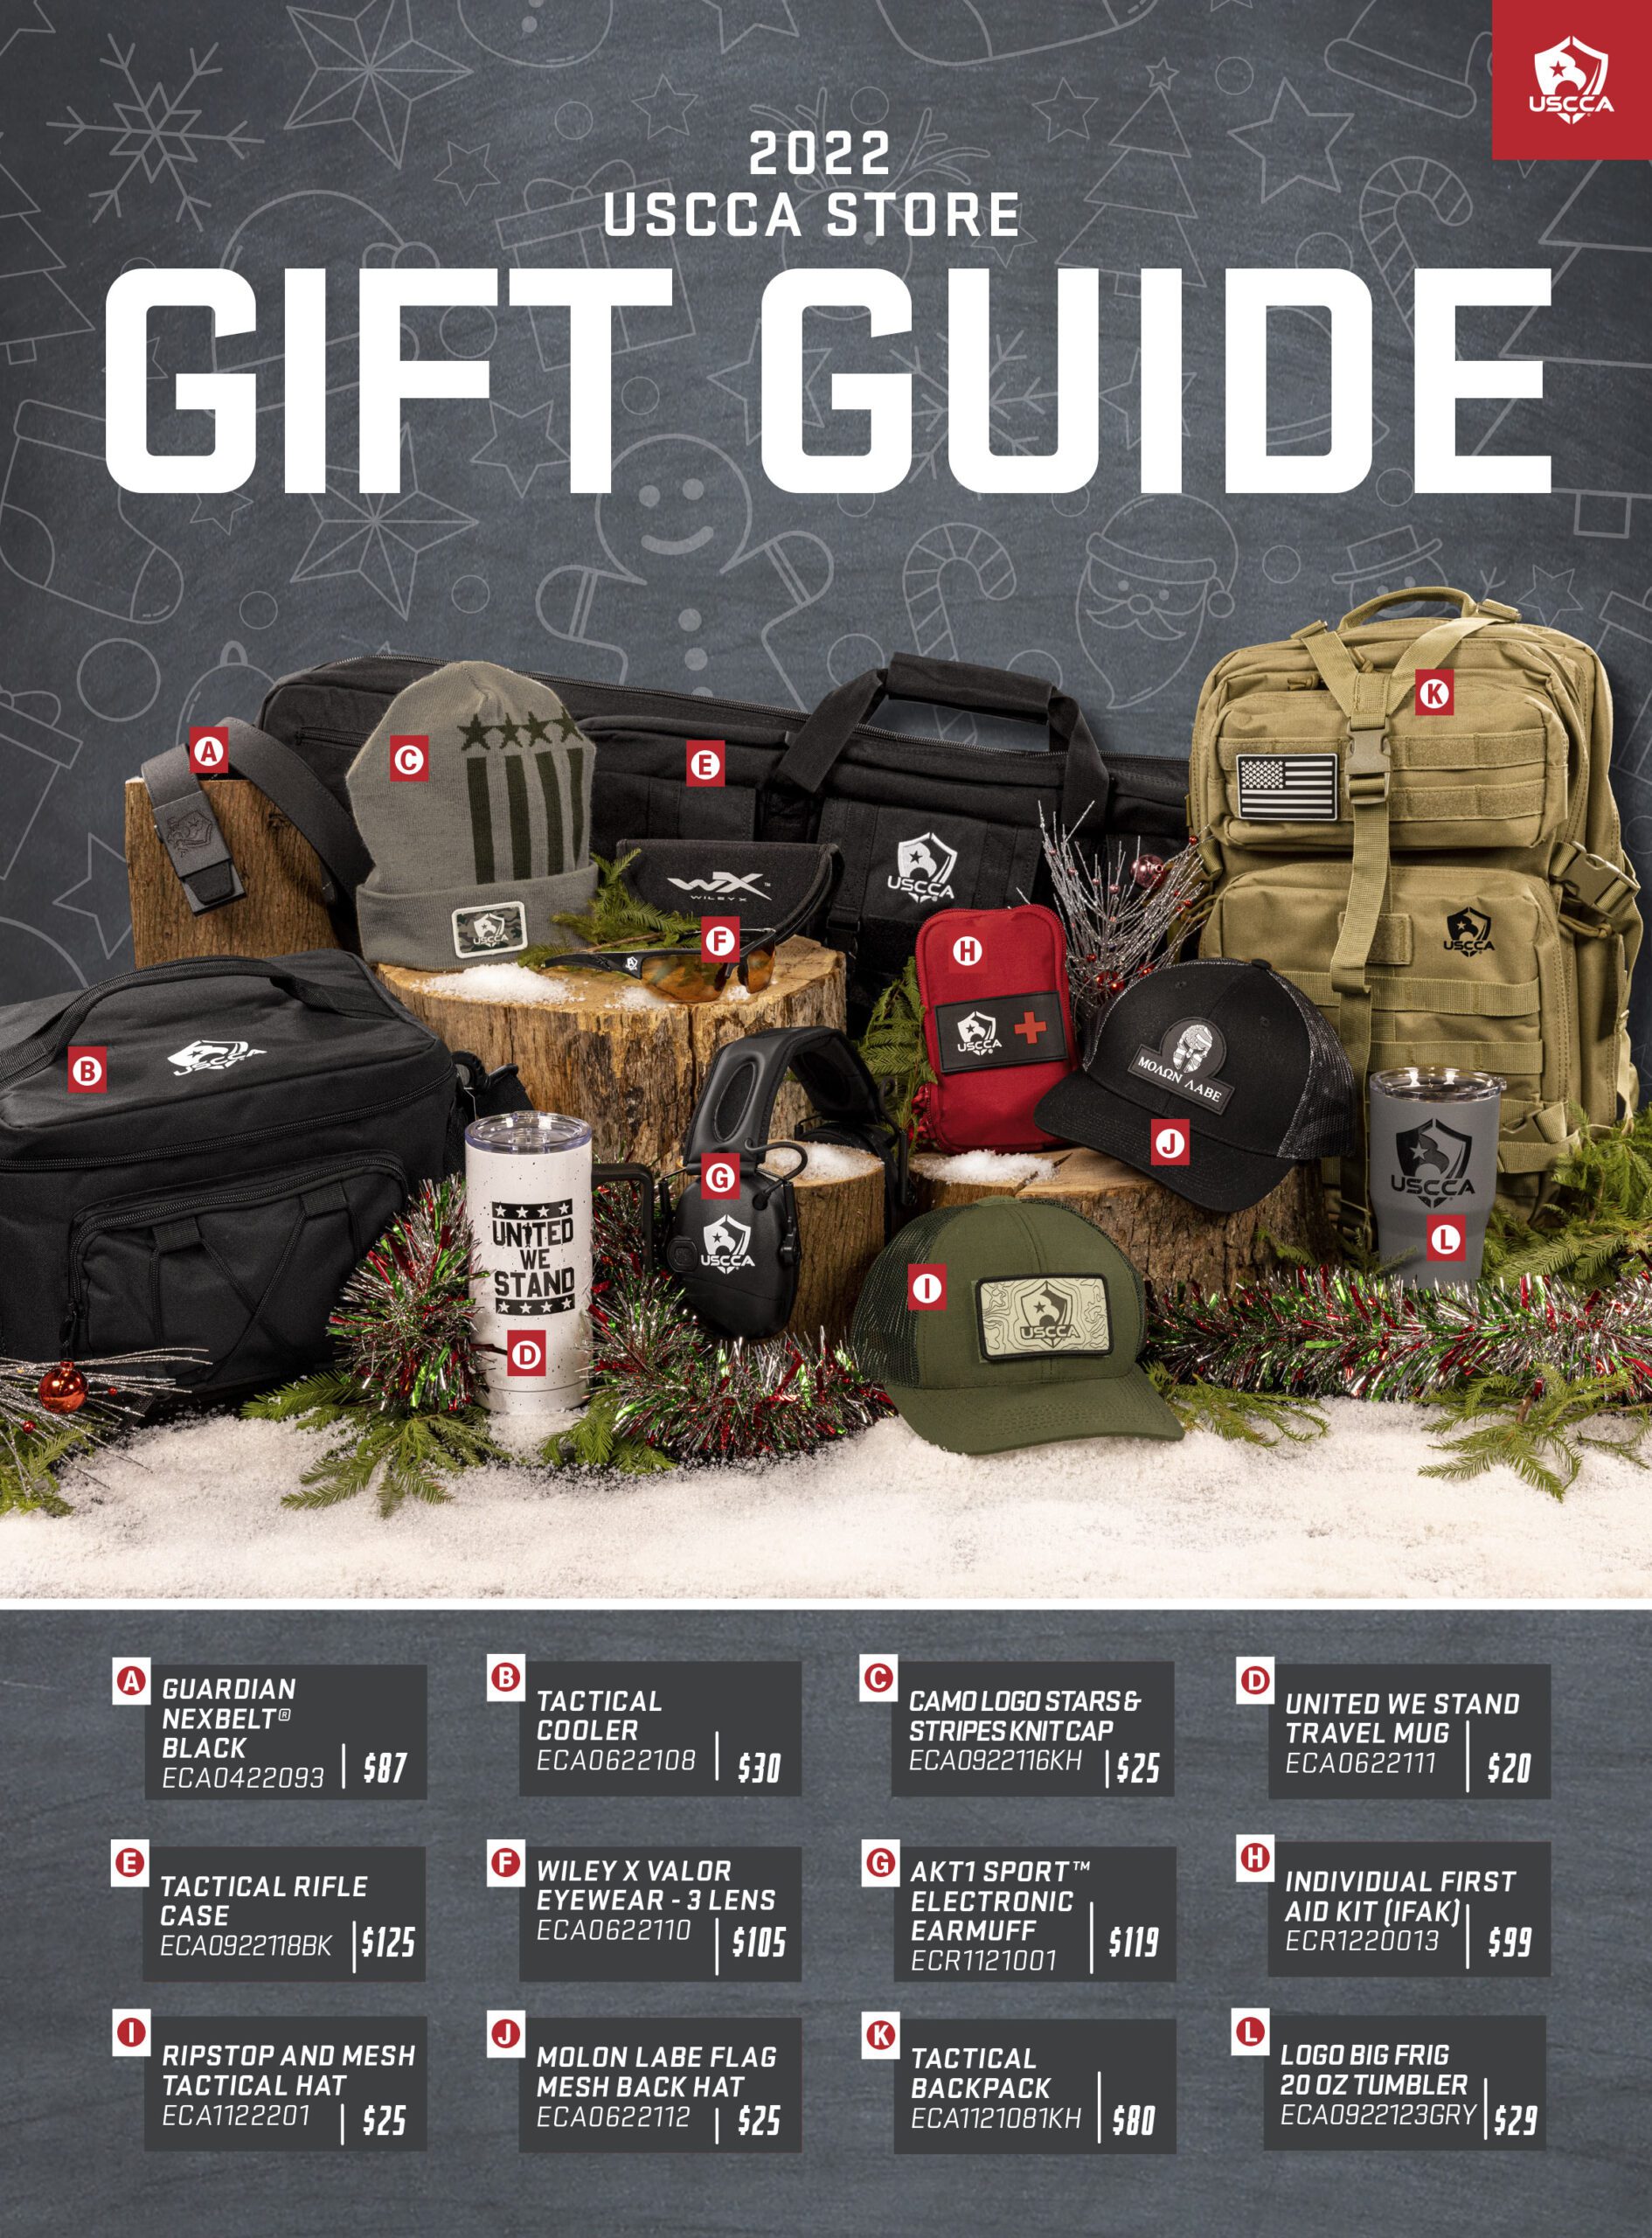 USCCA gift guide